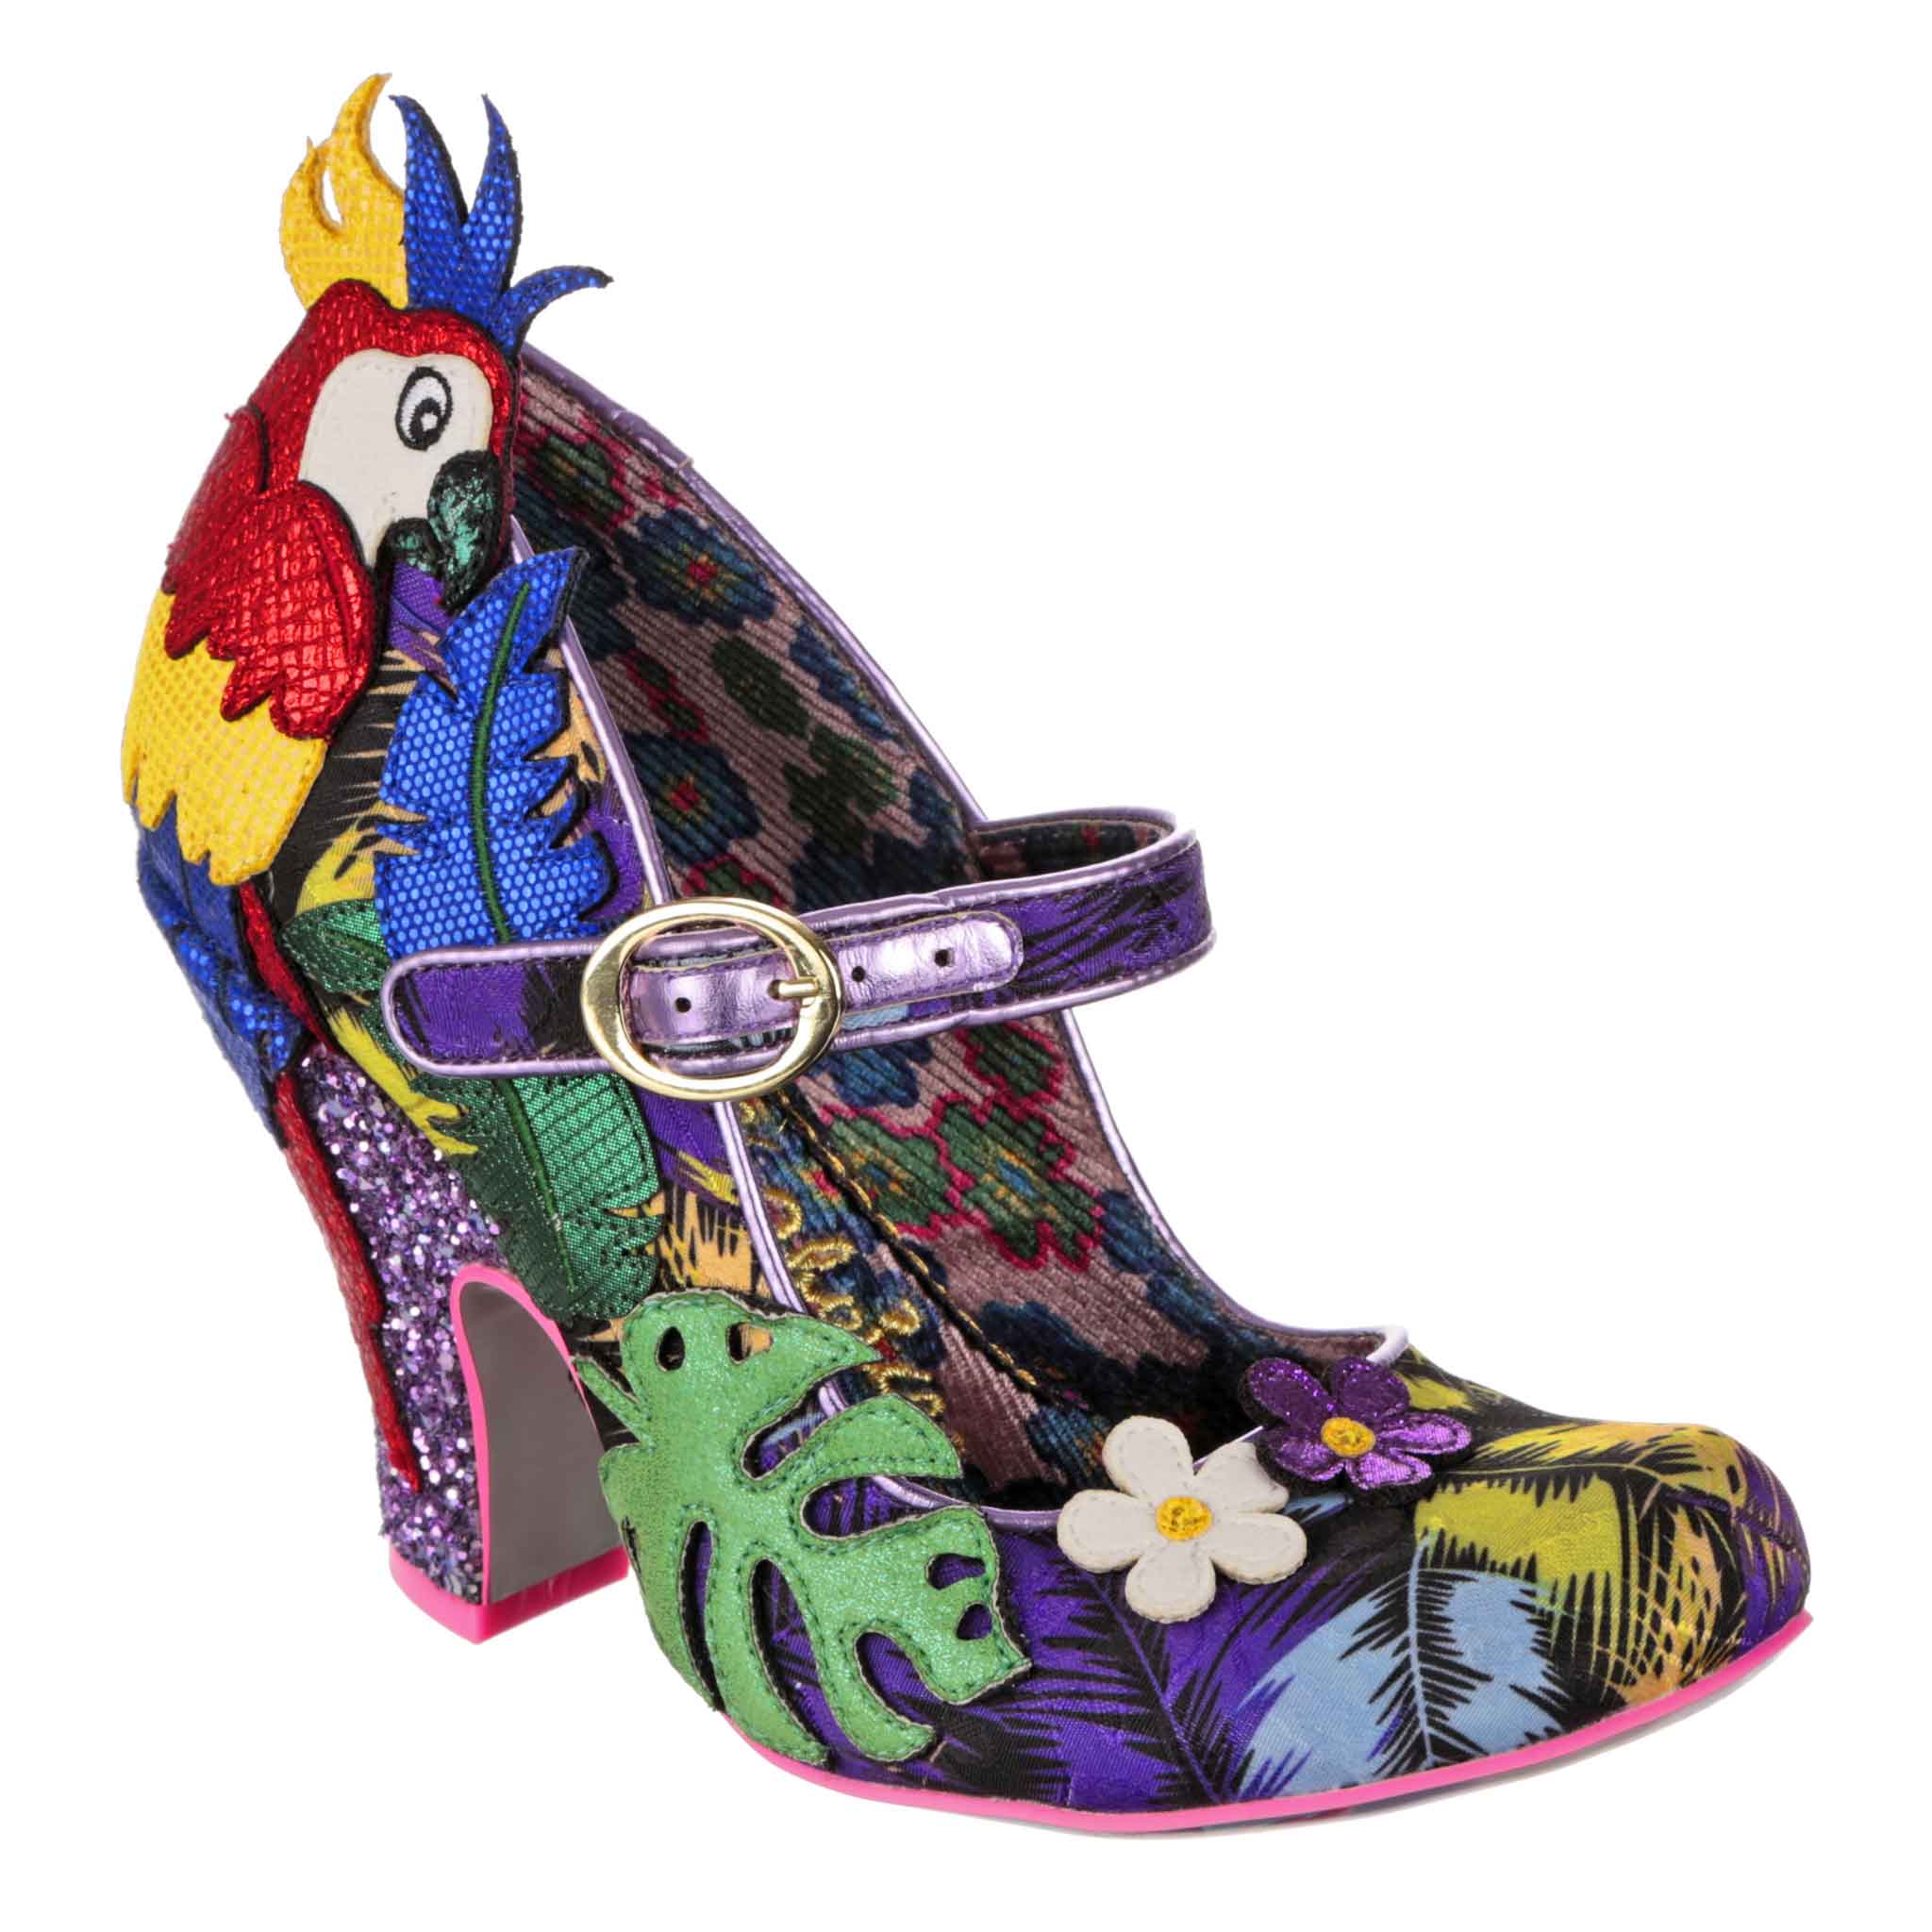 IRREGULAR CHOICE Shoes - Fast delivery